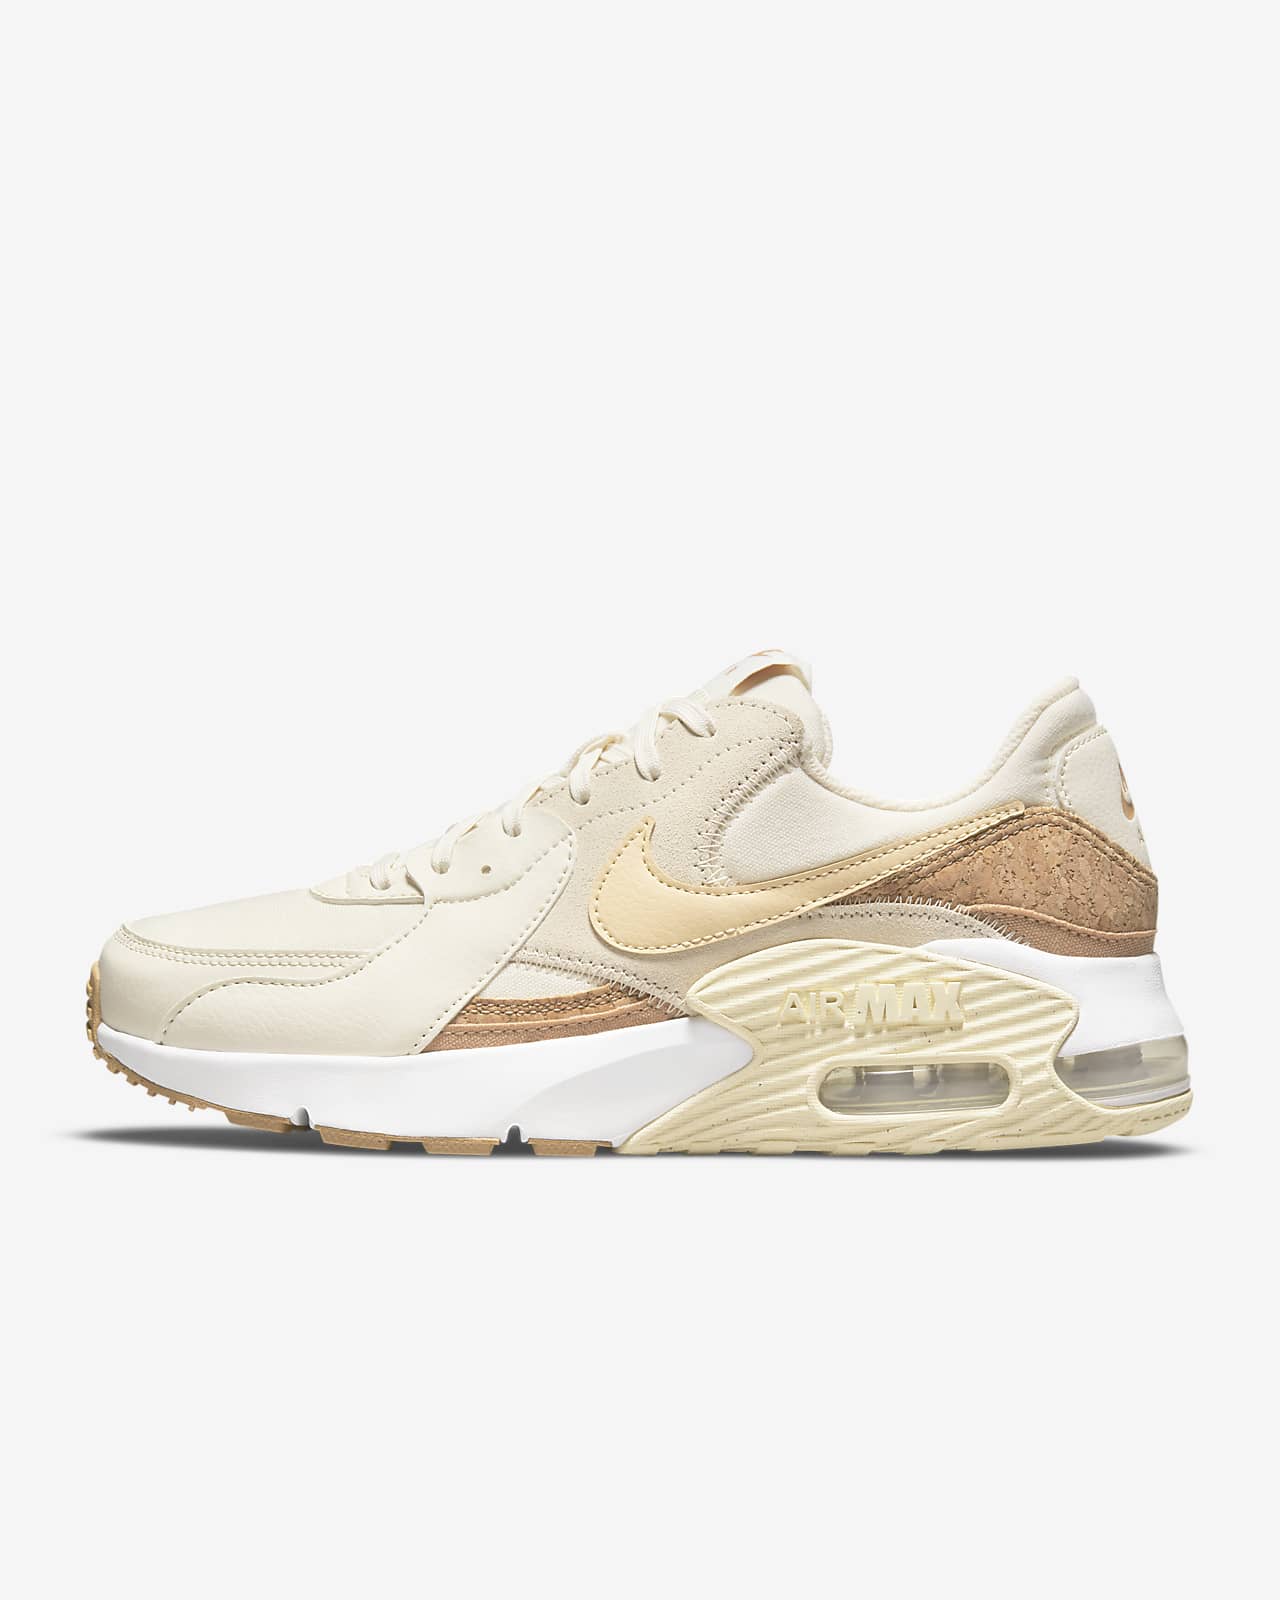 Nike Air Max Excee Women's Shoe